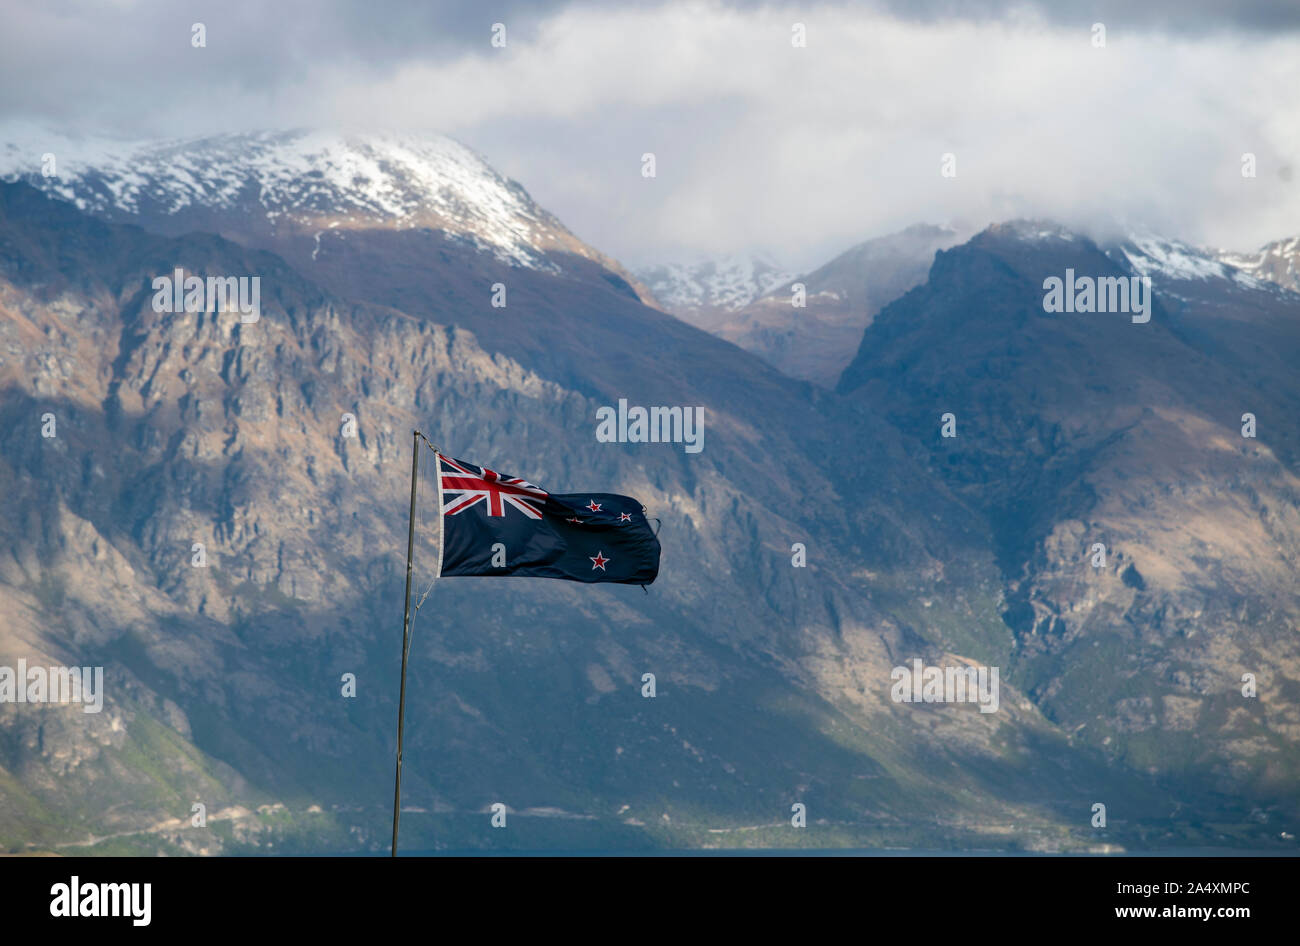 New Zealand flag flying in front of snowy mountains Stock Photo